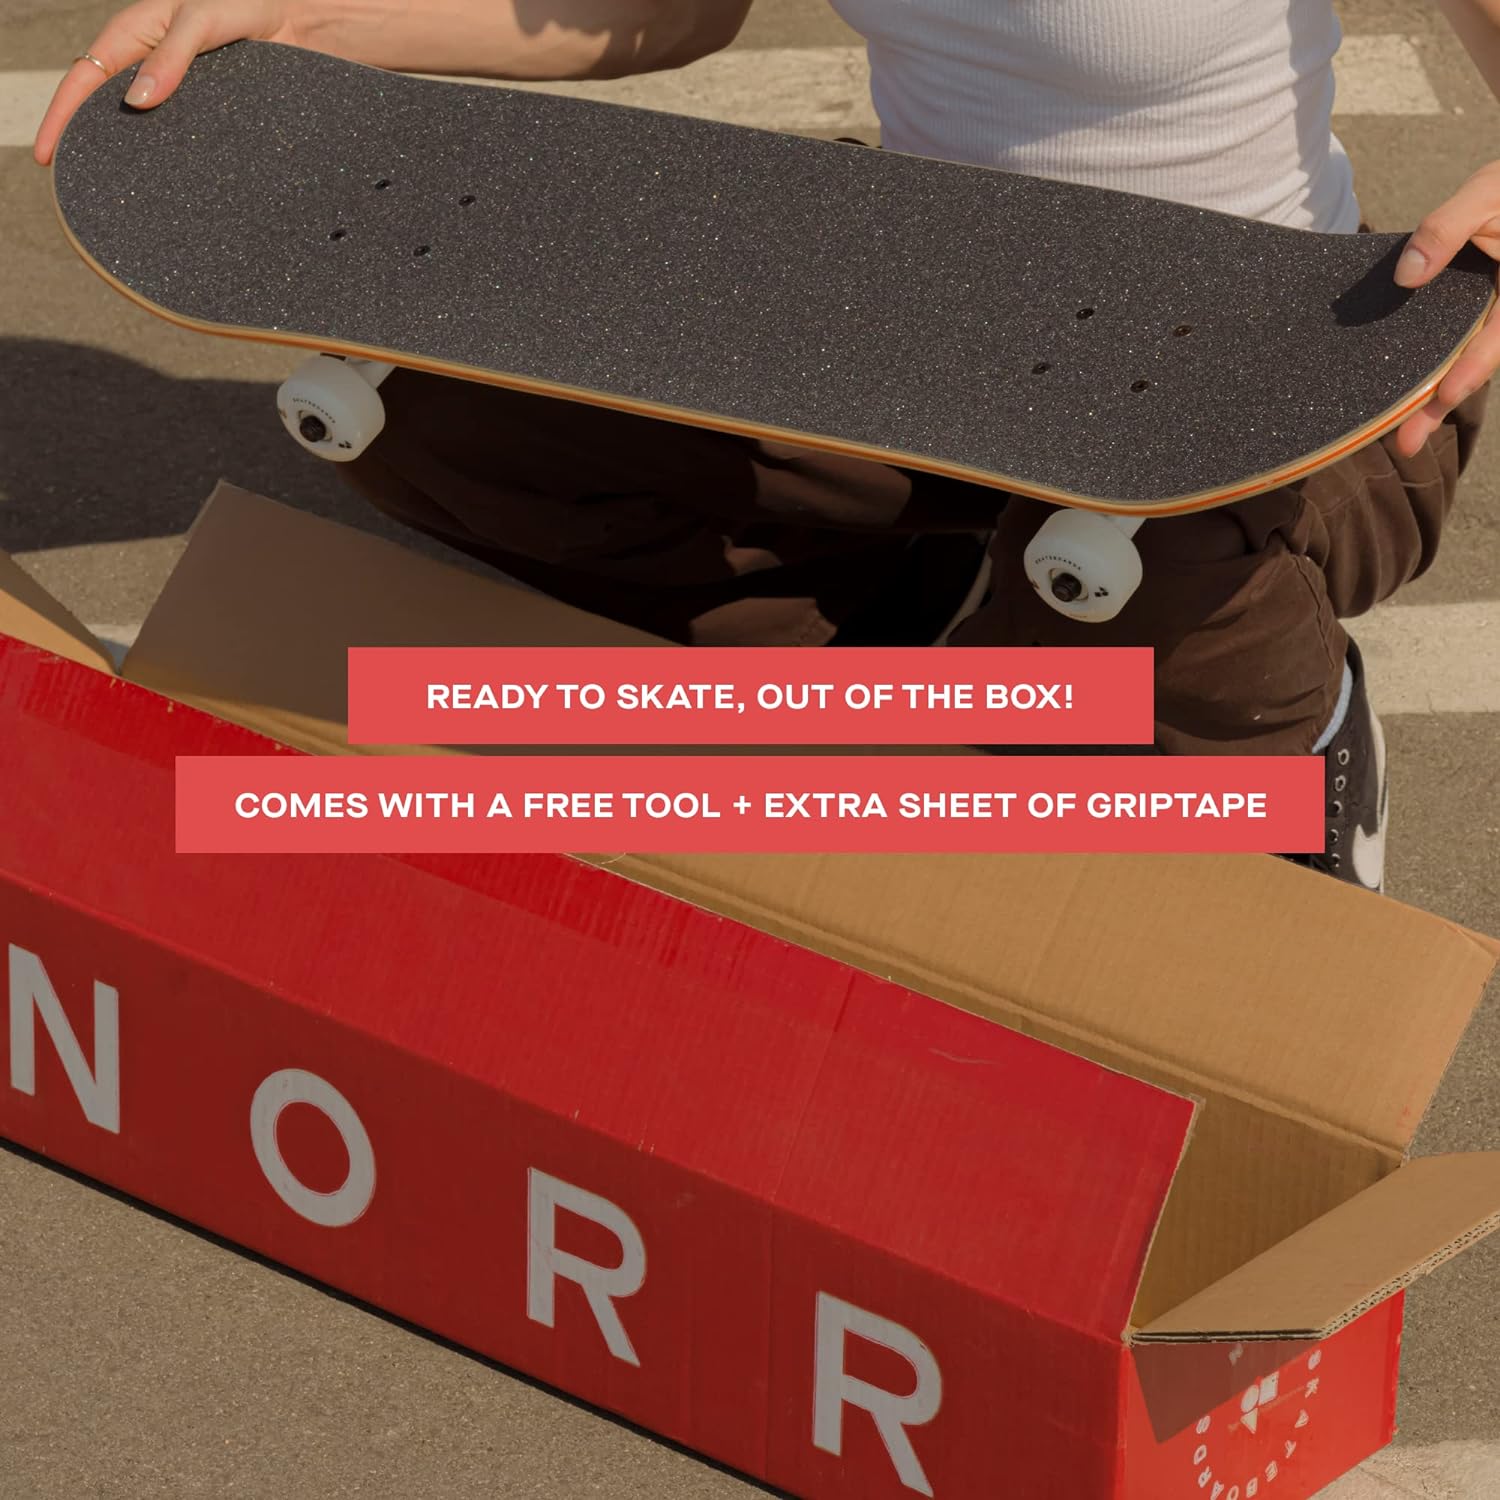 NORR Complete Fully Assembled Premium Maple Wood Skateboard w/Free Tool Kit + Grip Tape - Adults  Kids